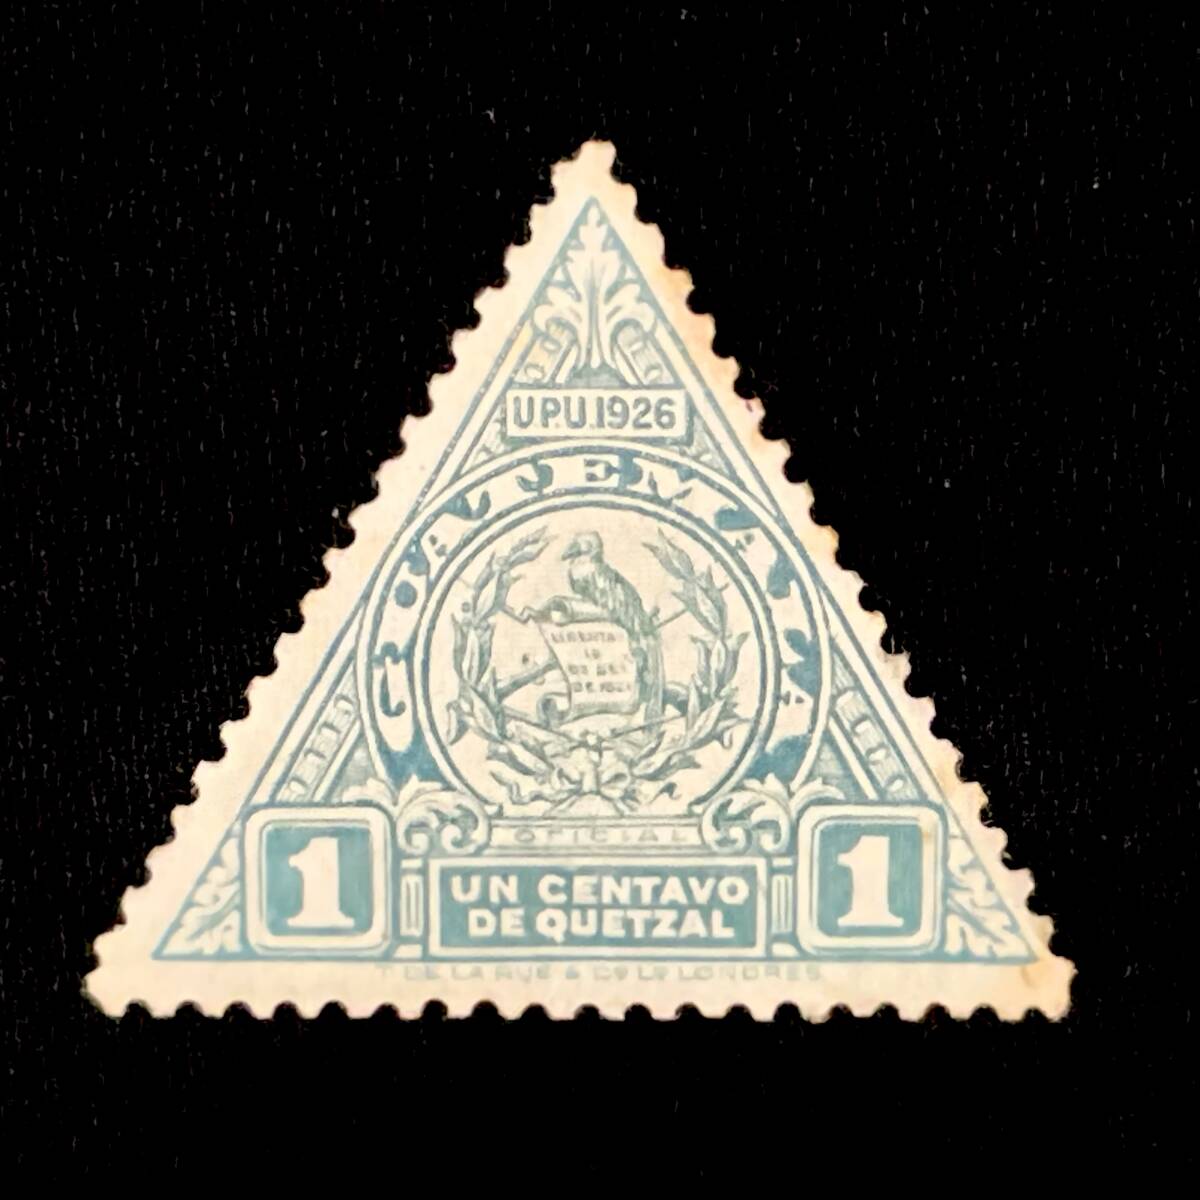 gatemala also peace country issue [. chapter ] middle South America 1929 year 1 month issue unused stamp 